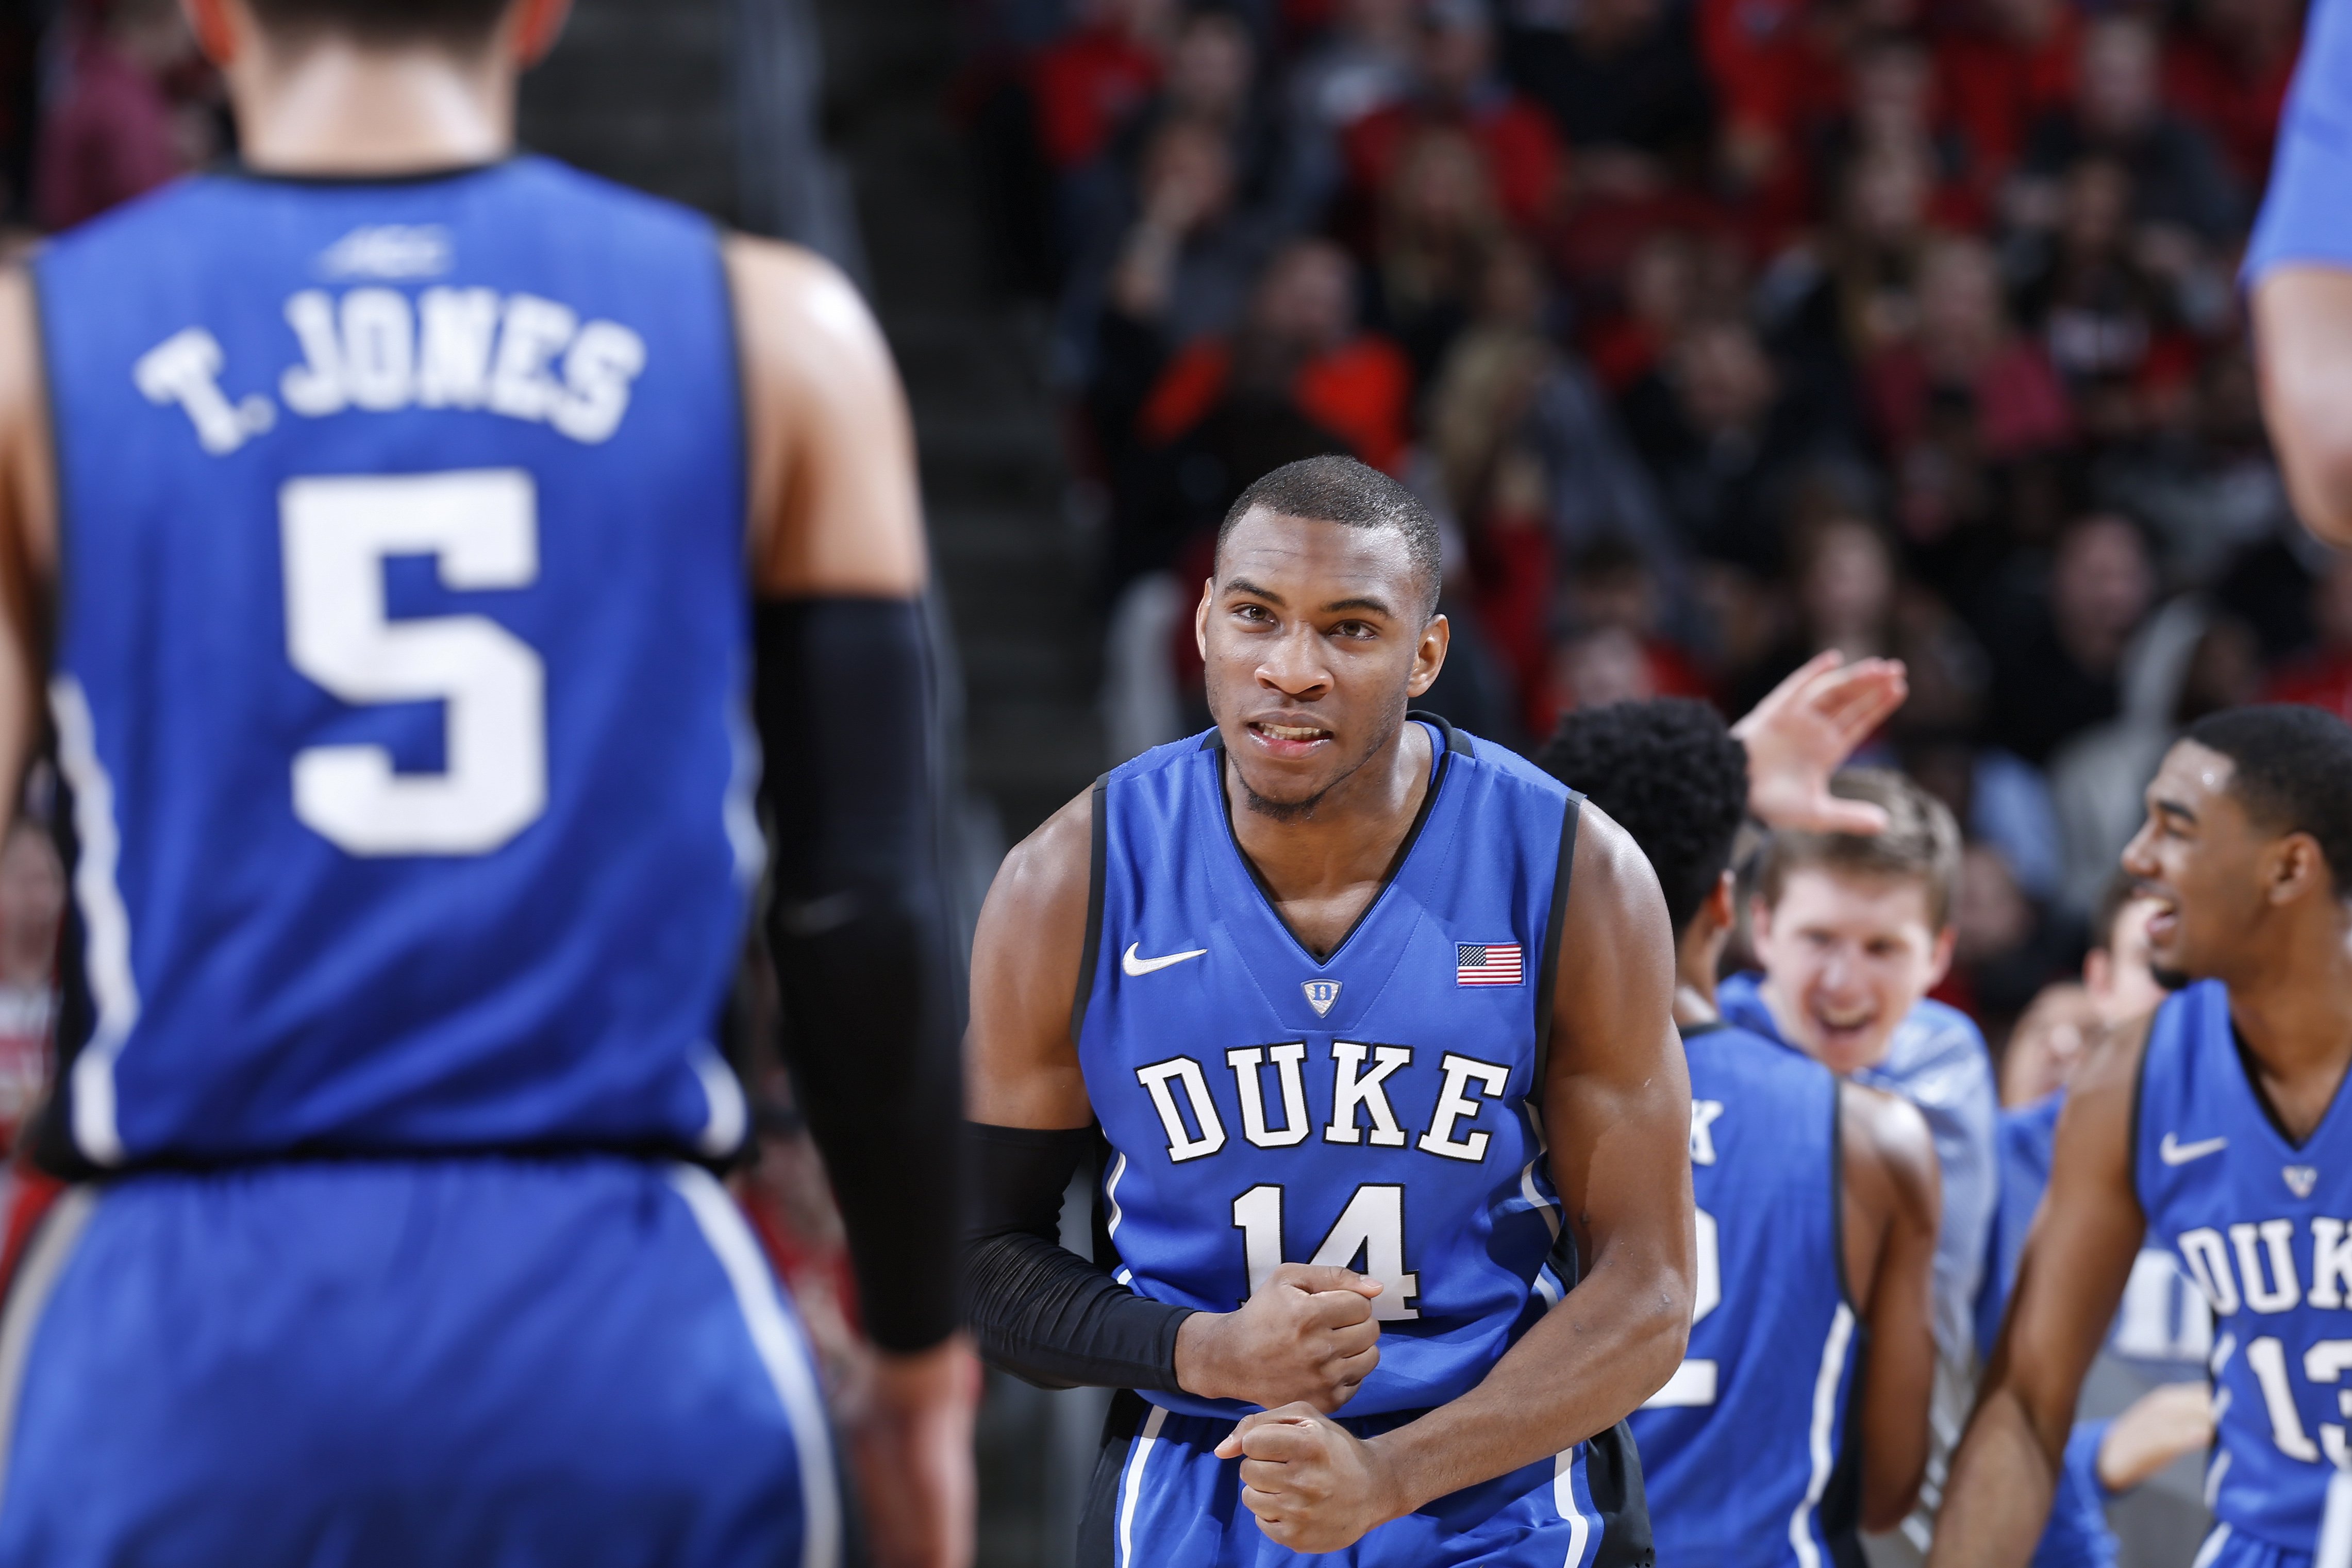 Rasheed Sulaimon of the Duke Blue Devils celebrates against the Louisville Cardinals in the first half of the game at KFC Yum! Center on Jan. 17, 2015 in Louisville, Kentucky. (Joe Robbins—Getty Images)